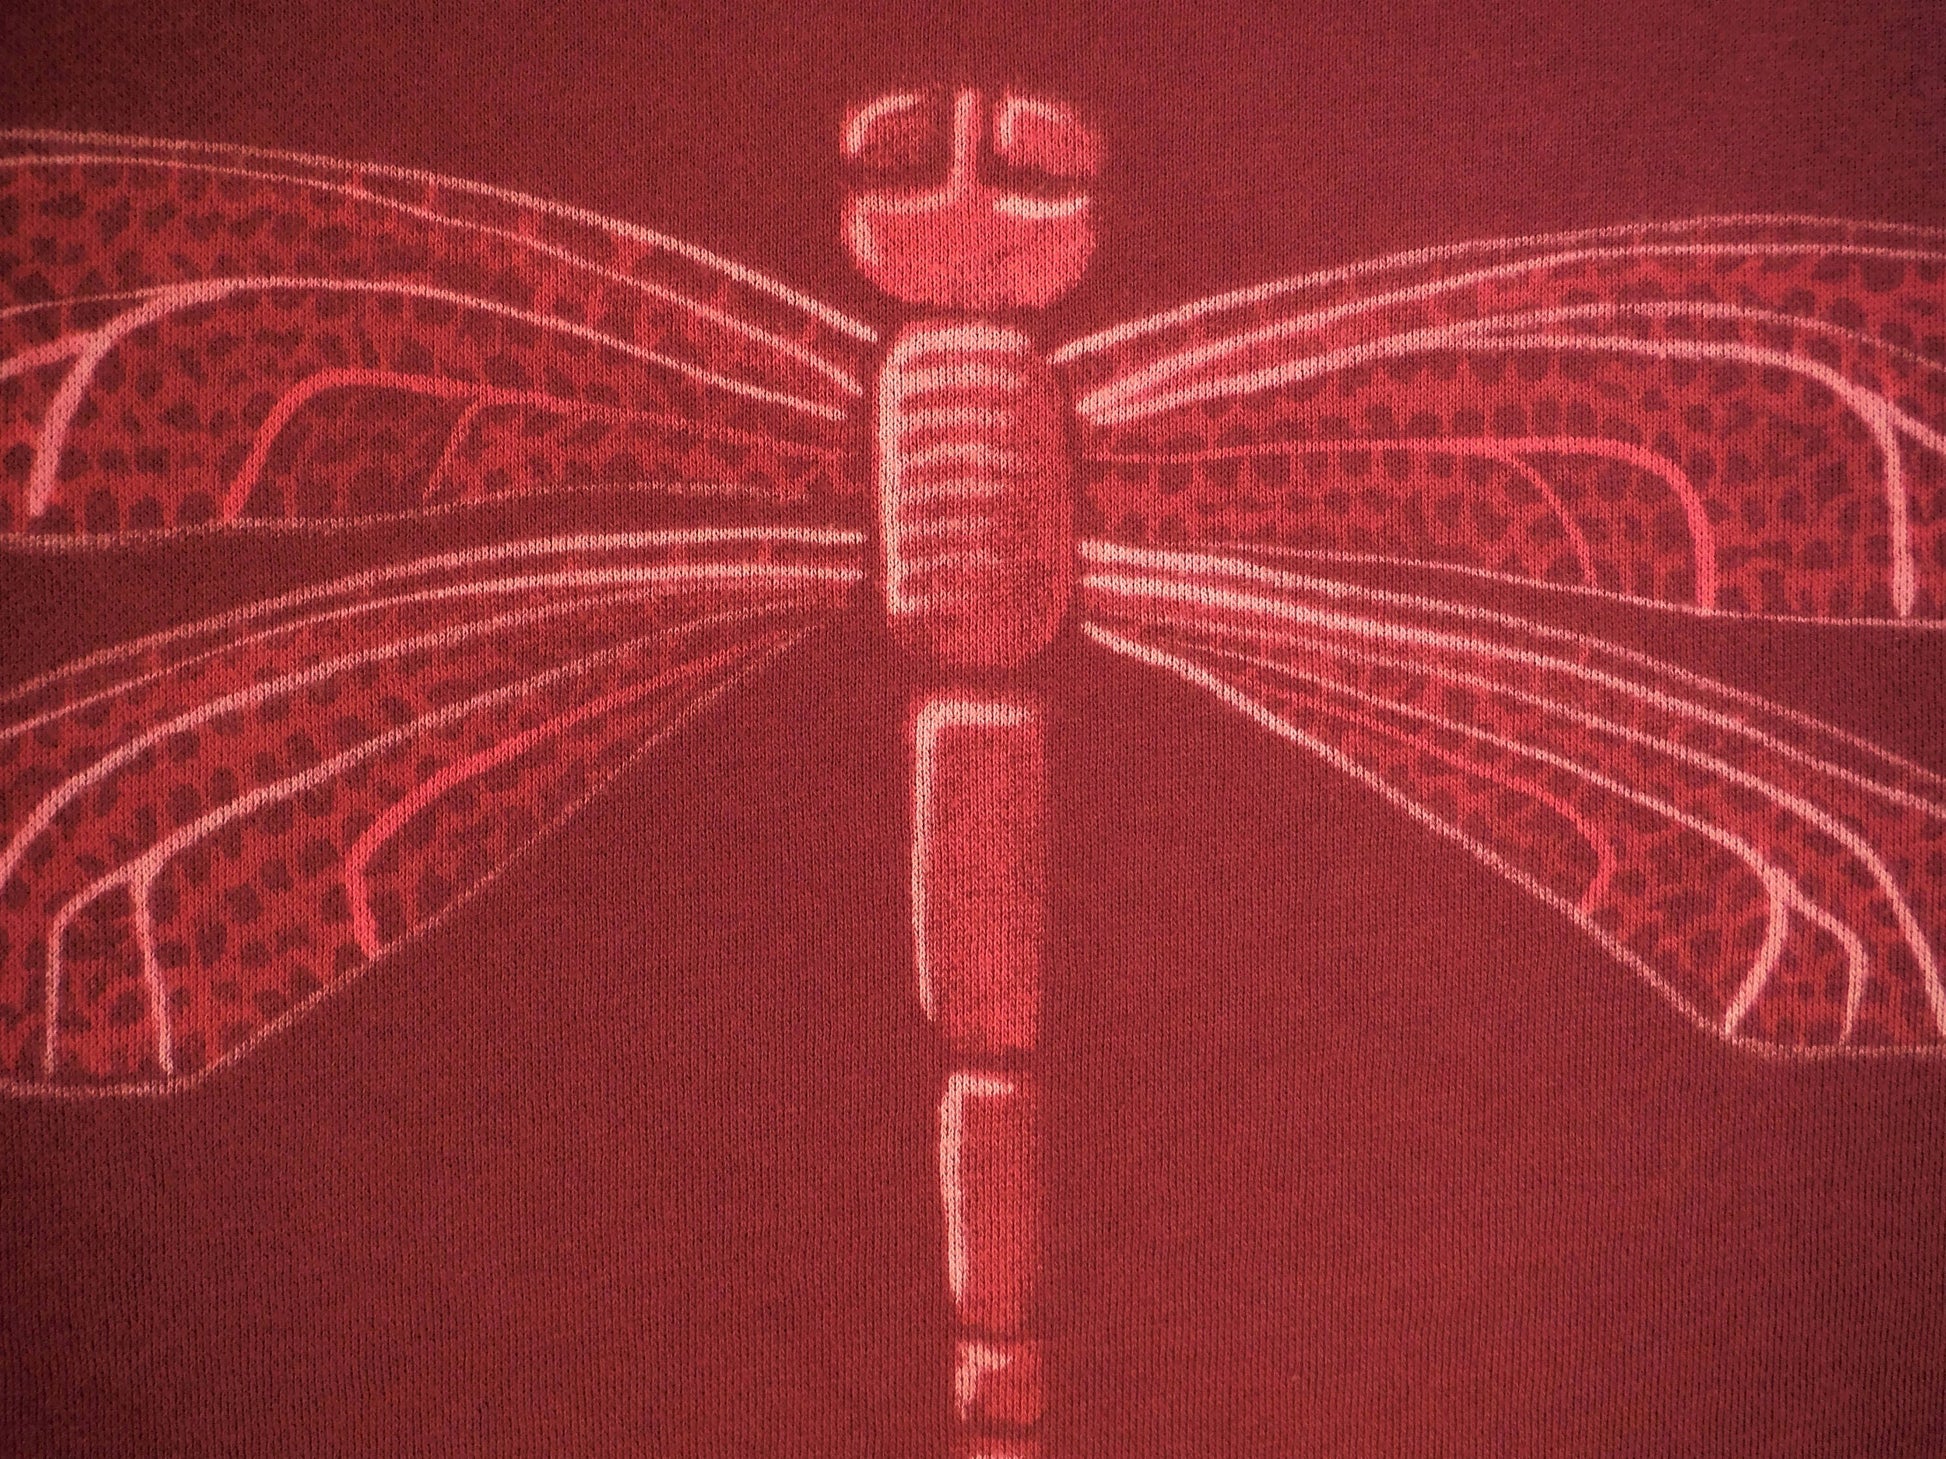 Hand Painted Bleach Art Dragonfly Sweatshirt - Wine Red (Small) - Bare Canvas